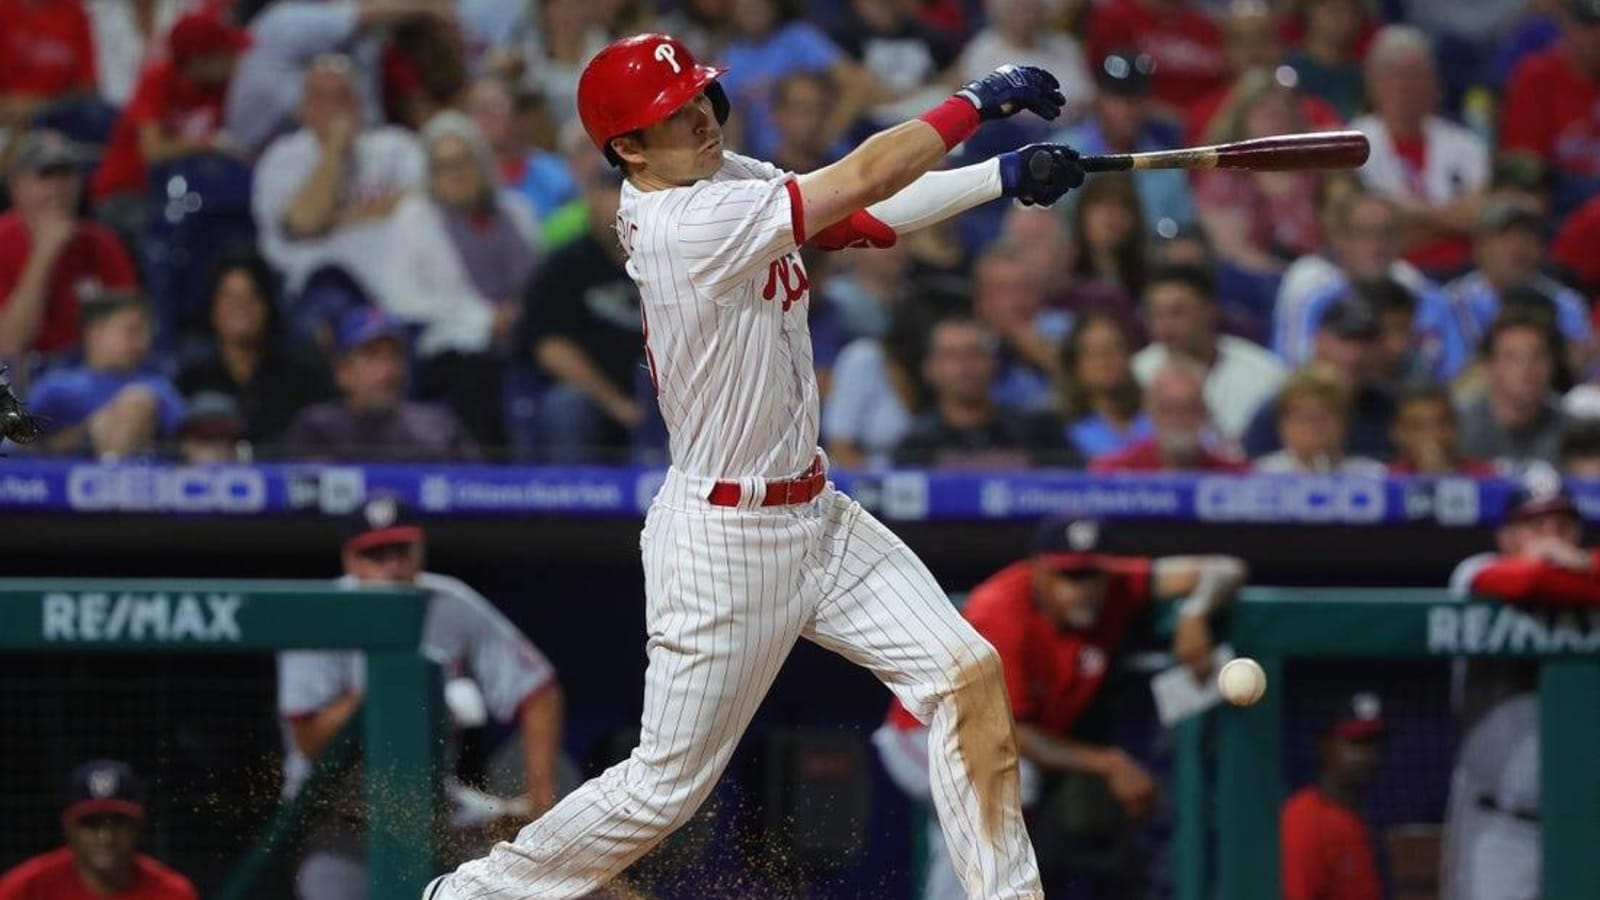 Youngsters step up for Phillies, who host Nationals again